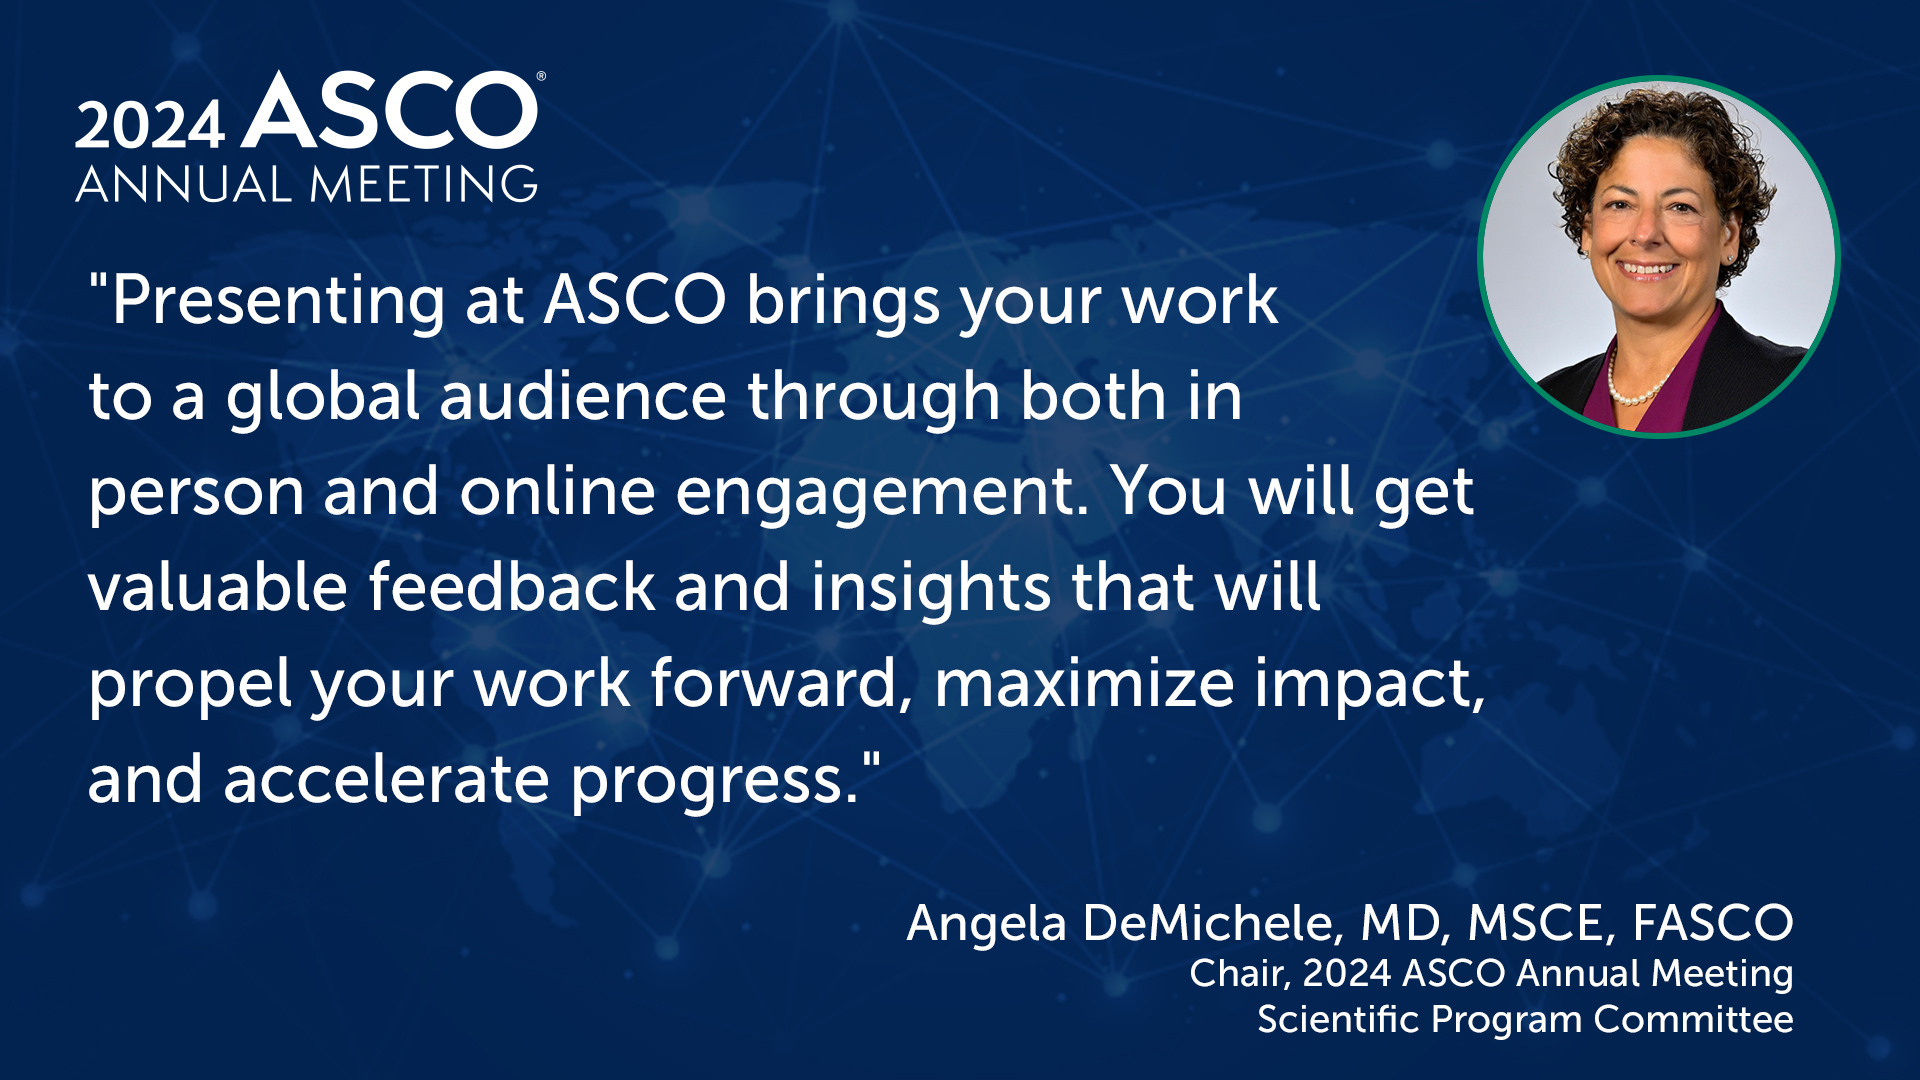 Abstract submissions are now open for ASCO24! ASCO OncoDaily